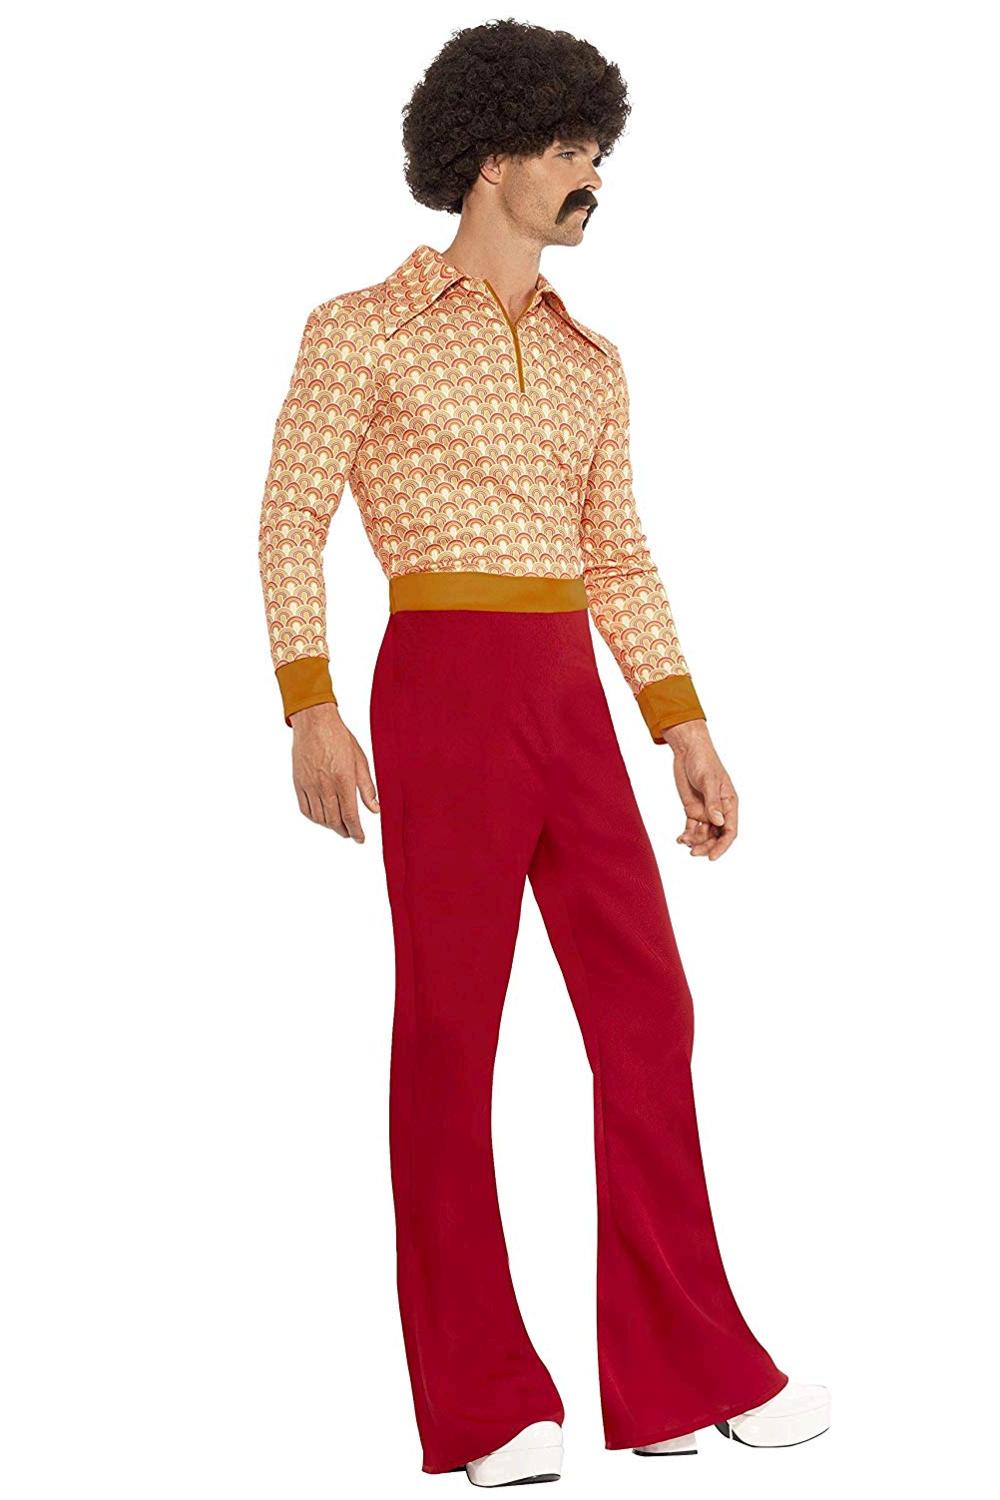 Smiffys Authentic 70s Guy Costume, Red, Size L - US Size 42